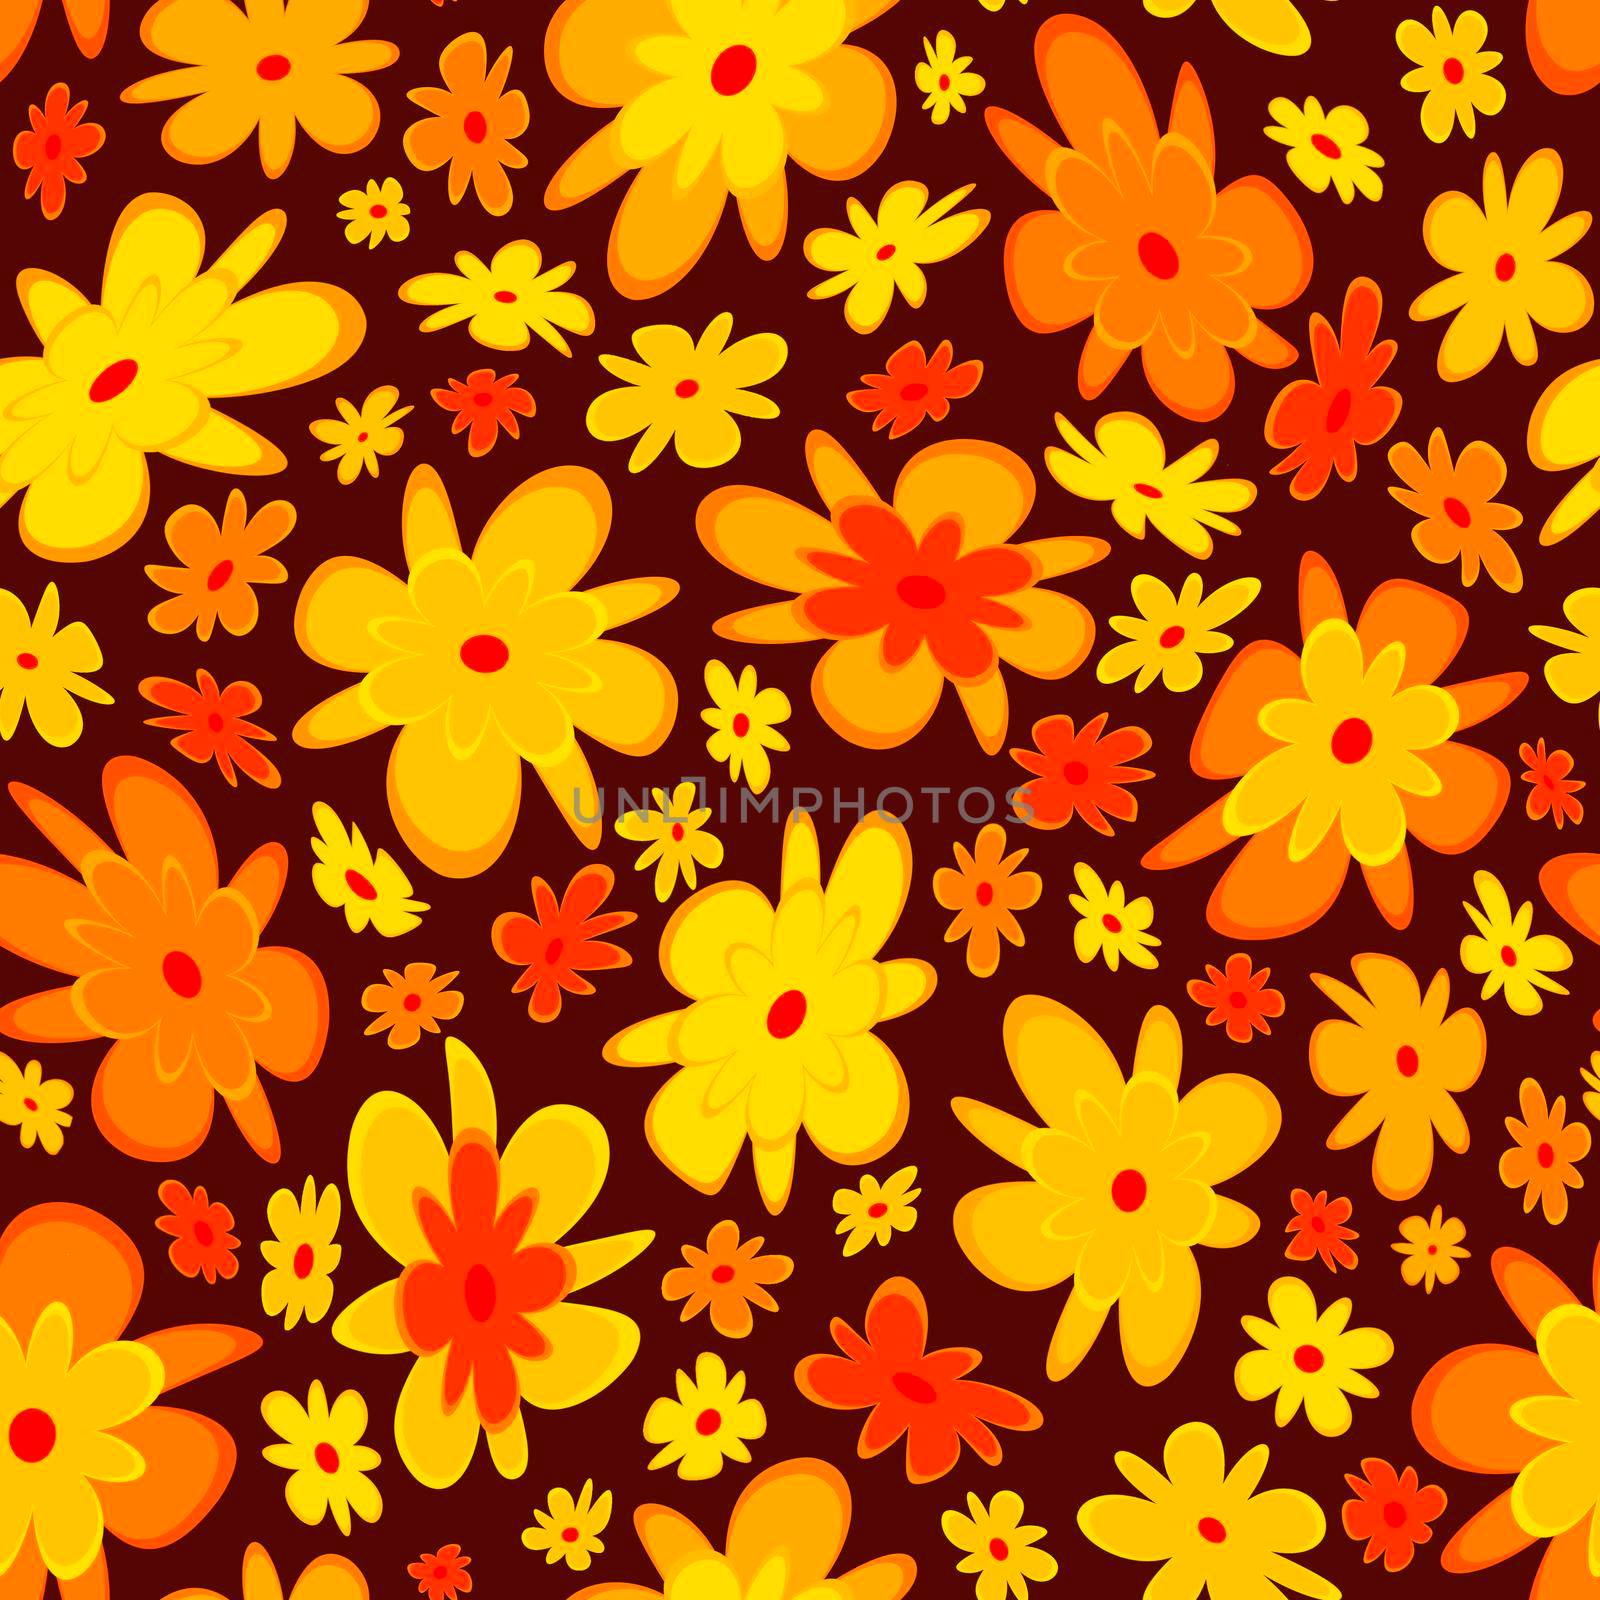 Trendy fabric pattern with miniature flowers.Summer print.Fashion design.Motifs scattered random.Elegant template for fashion prints.Good for fashion,textile,fabric,gift wrapping paper.Yellow orange.